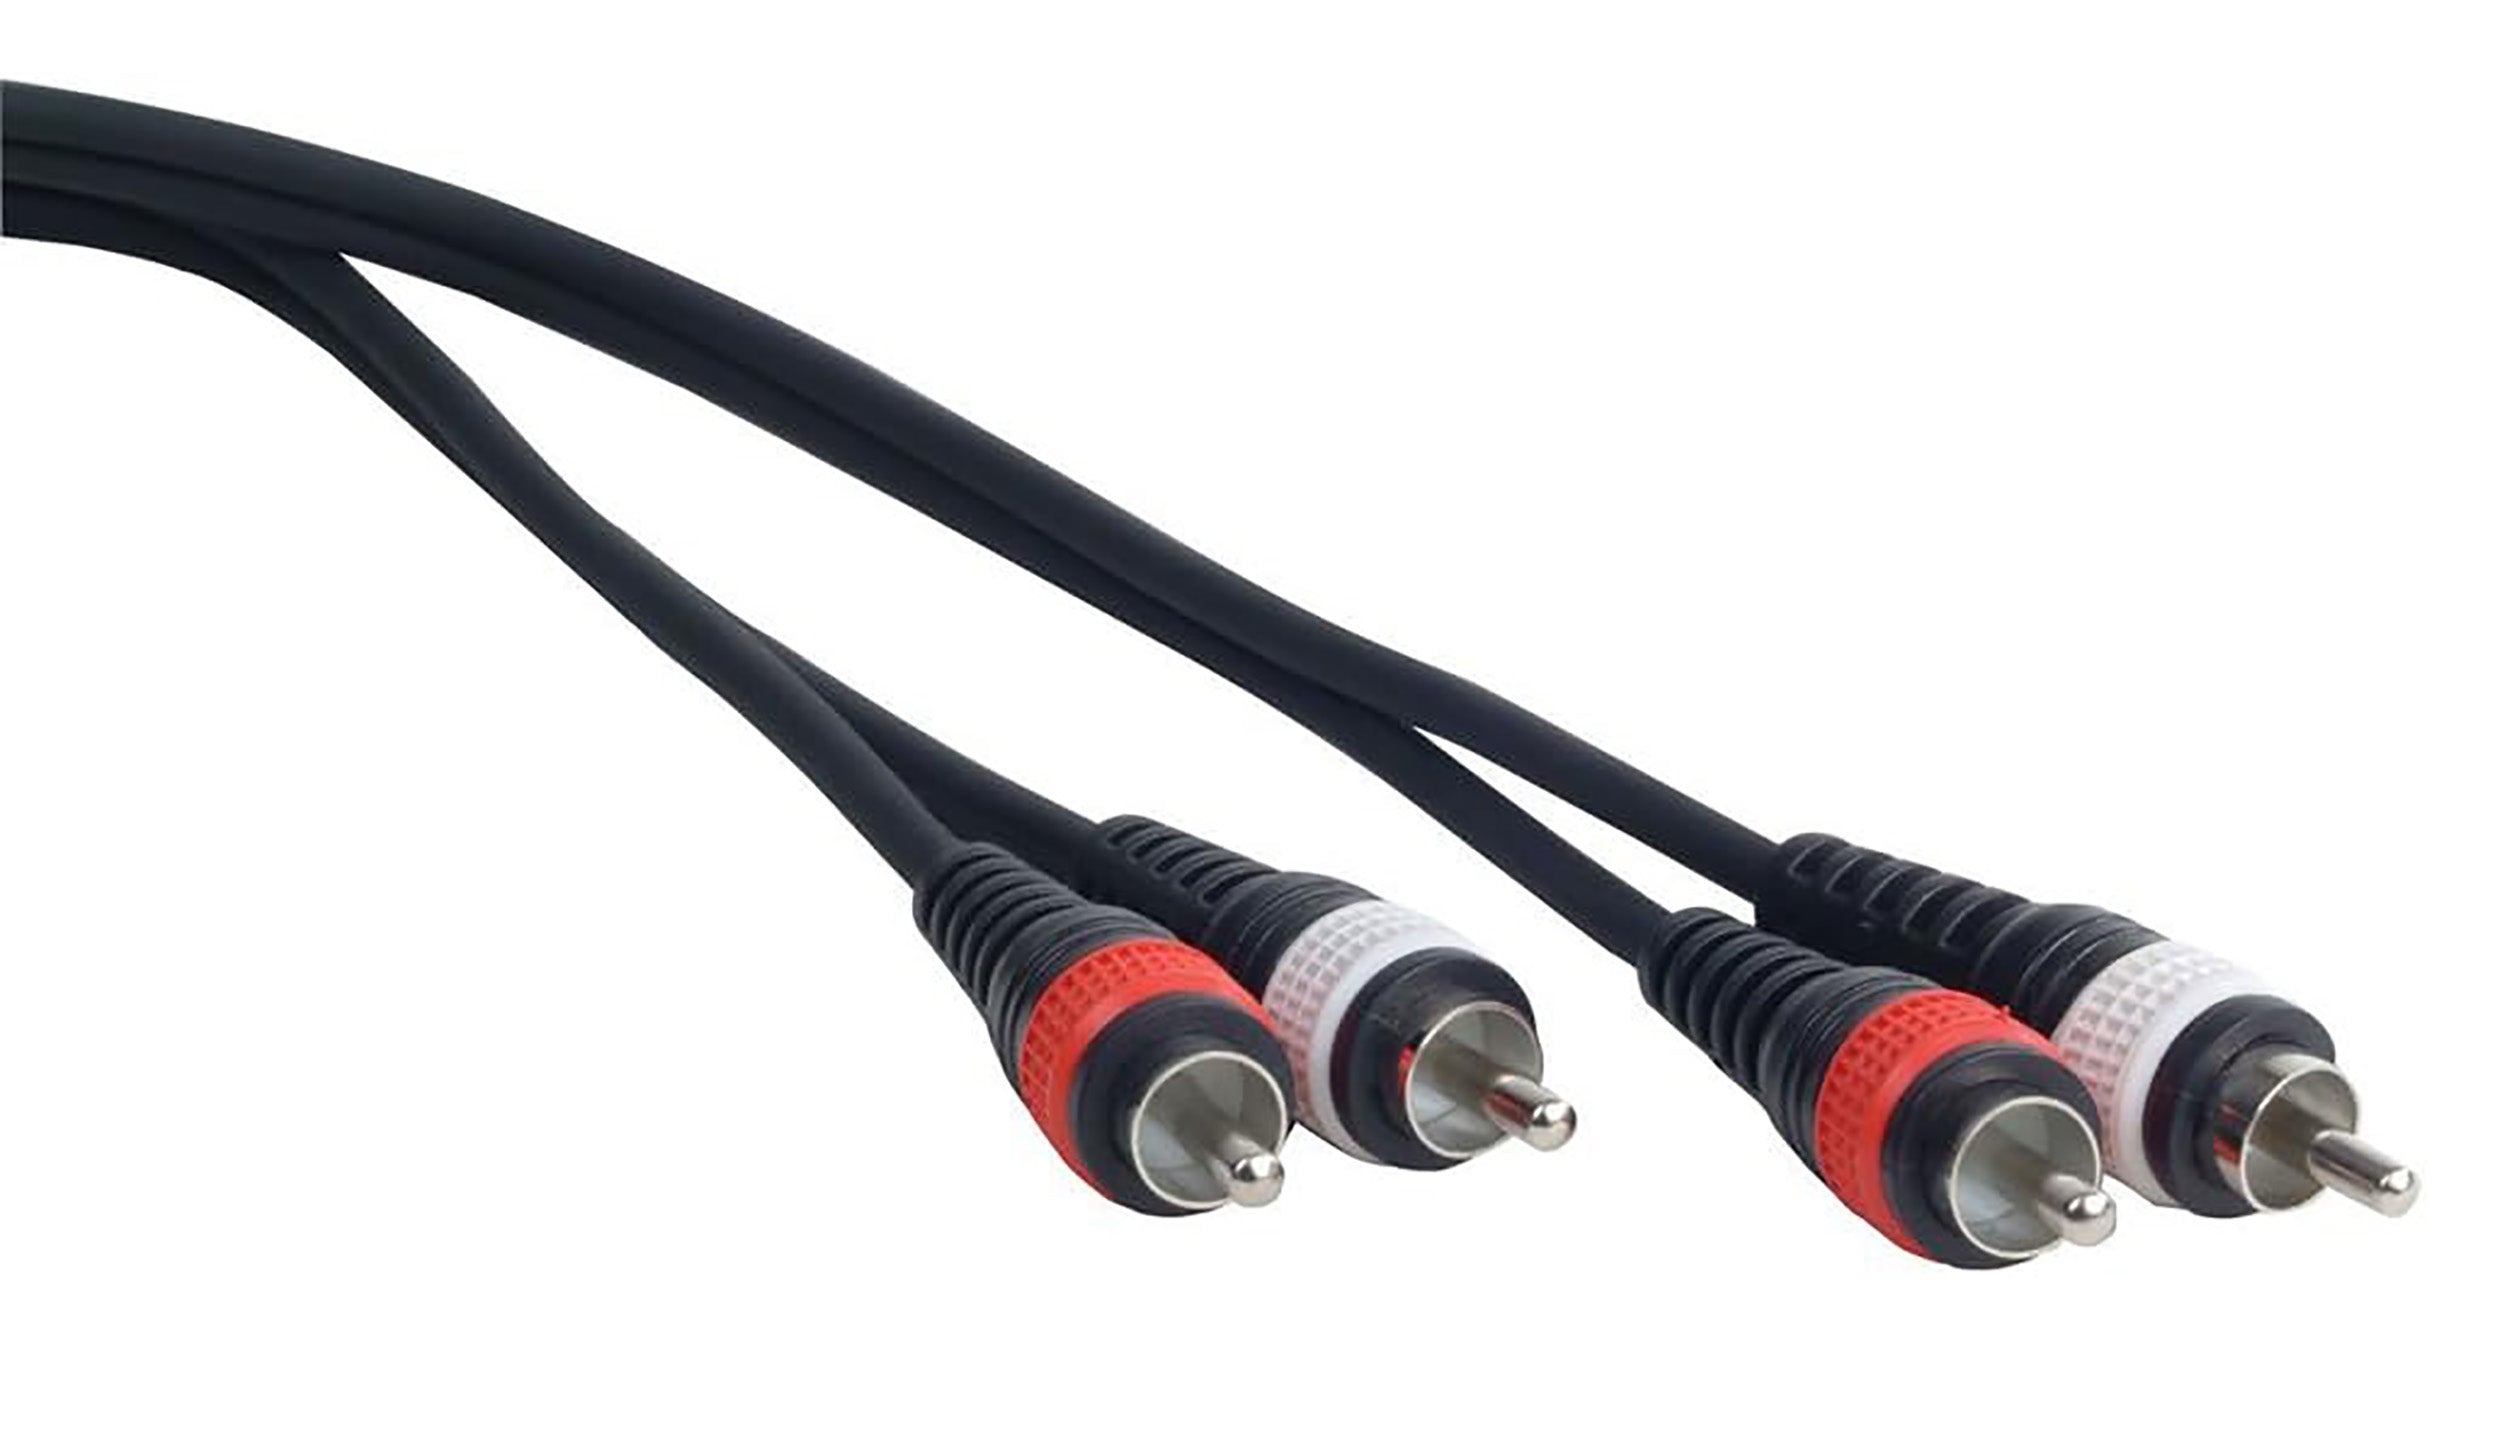 Accu-Cable, Stage and Studio Dual RCA Power Cable by Accu Cable